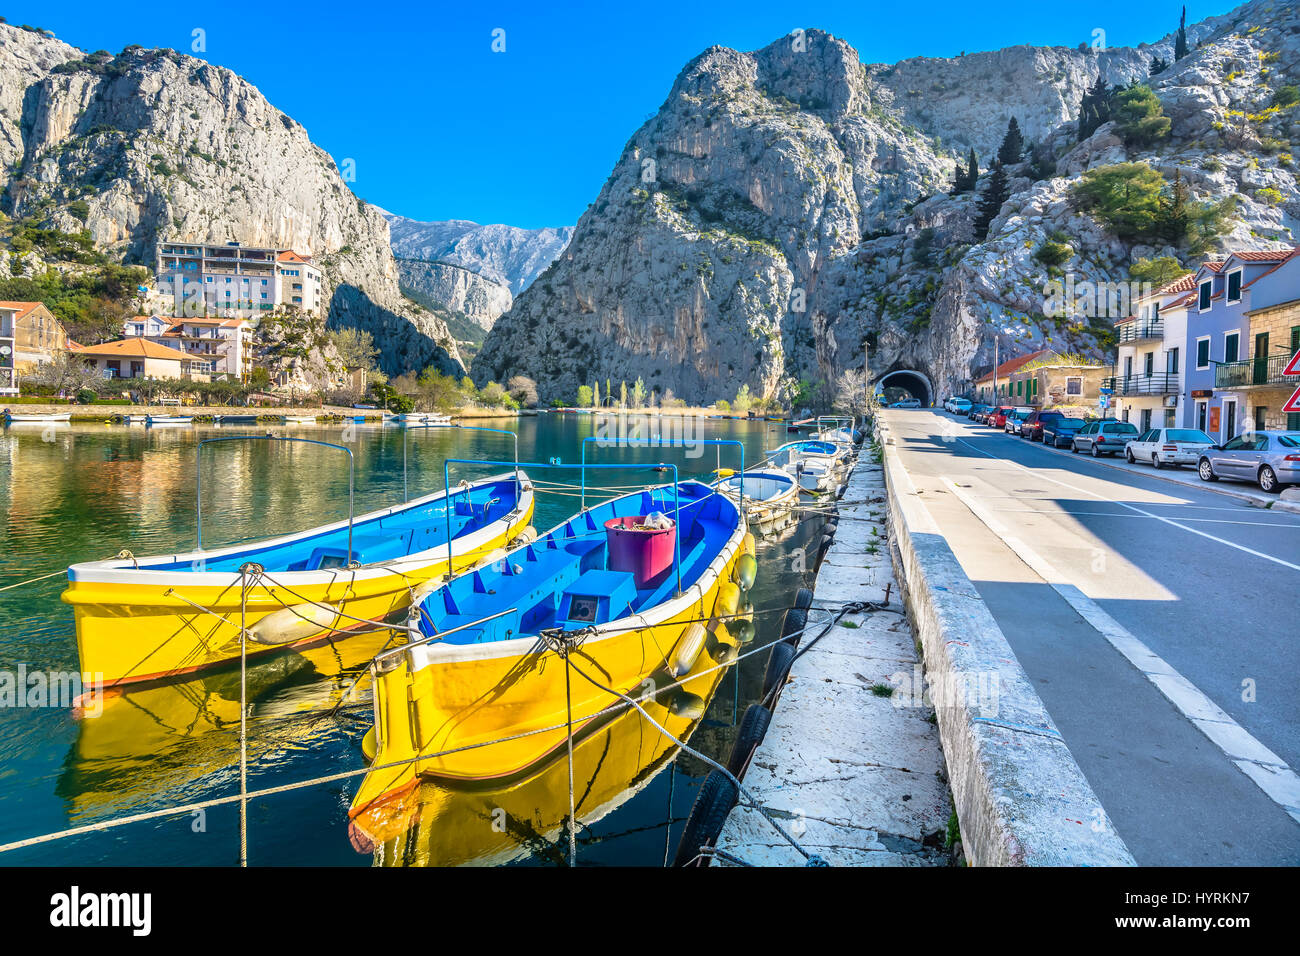 Picturesque scenery in town Omis and river Cetina estuary, Croatia. Stock Photo